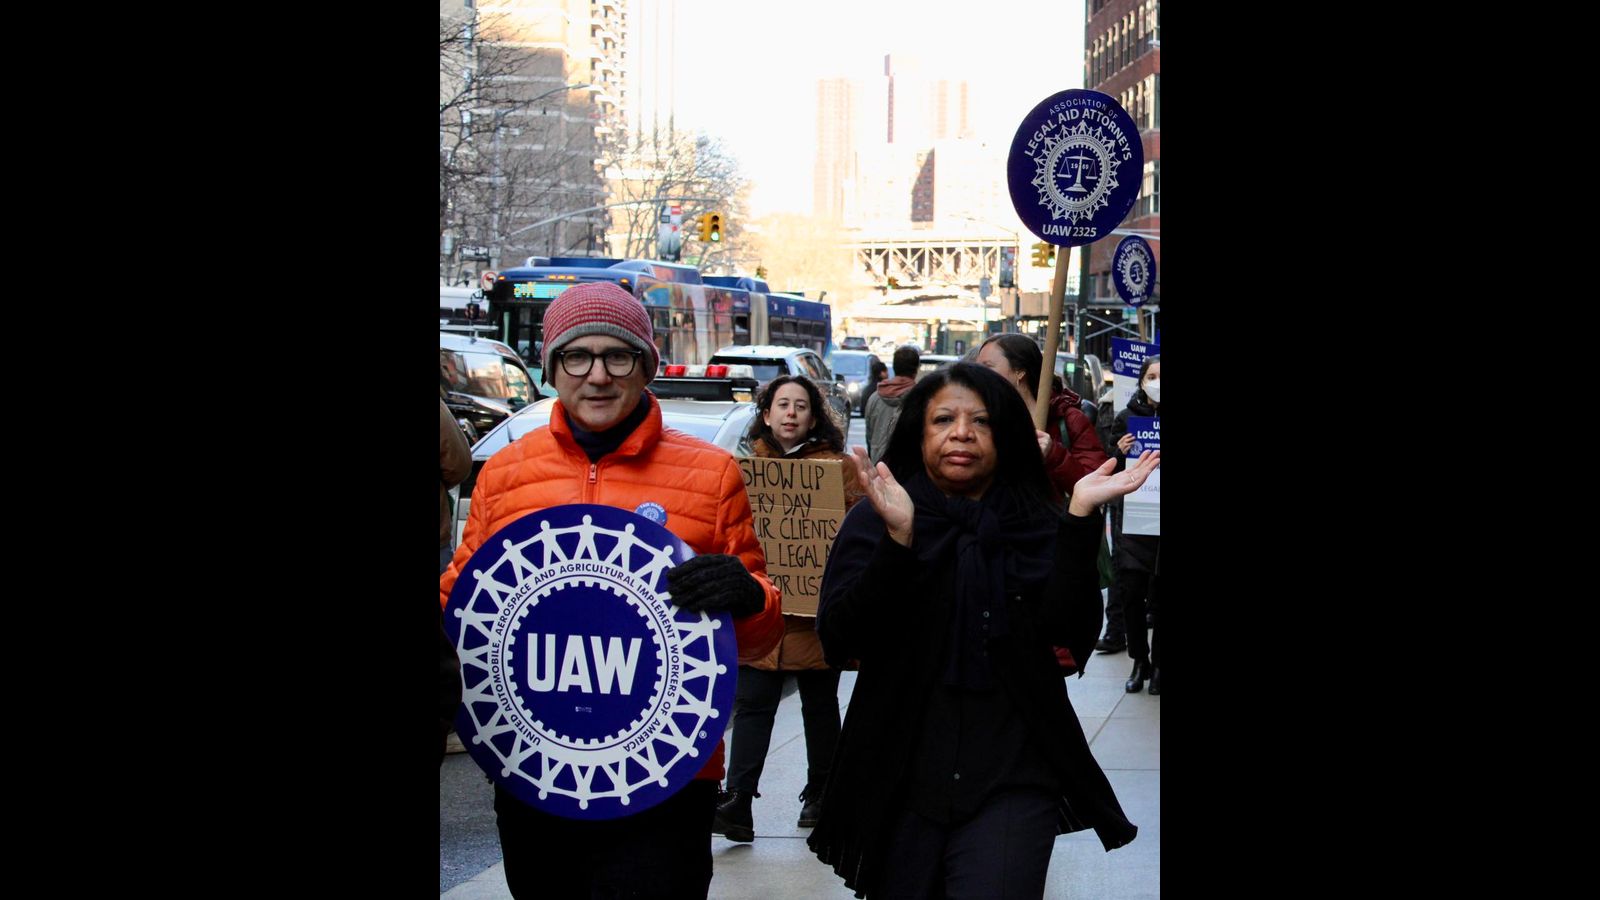 1,000 Legal Aid workers in New York City hold walkout in contract struggle